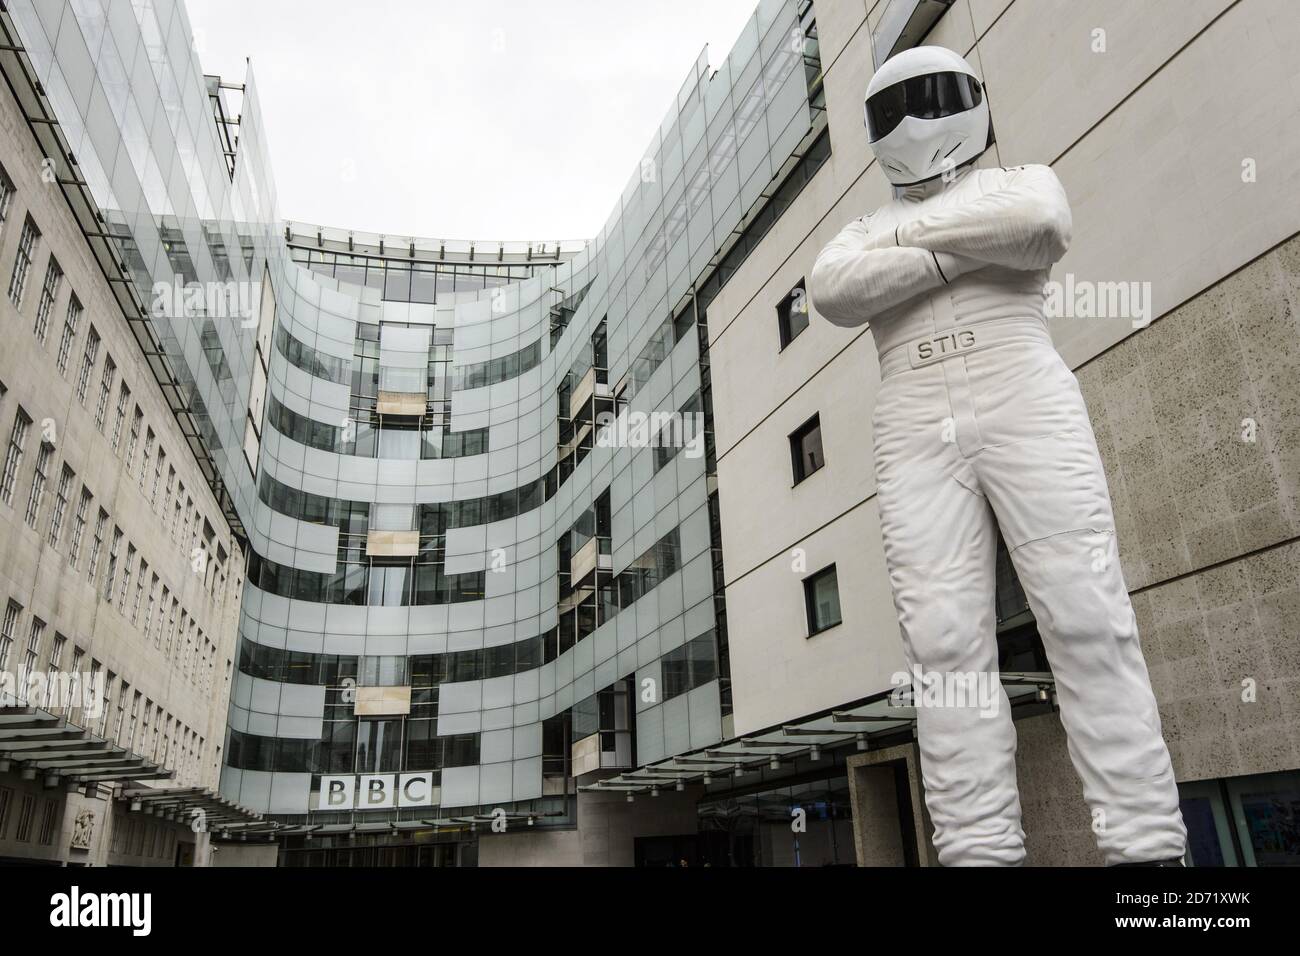 A giant statue of The Stig stands outside BBC Broadcasting House in central London, ahead of the new series of Top Gear which airs later this month. Stock Photo